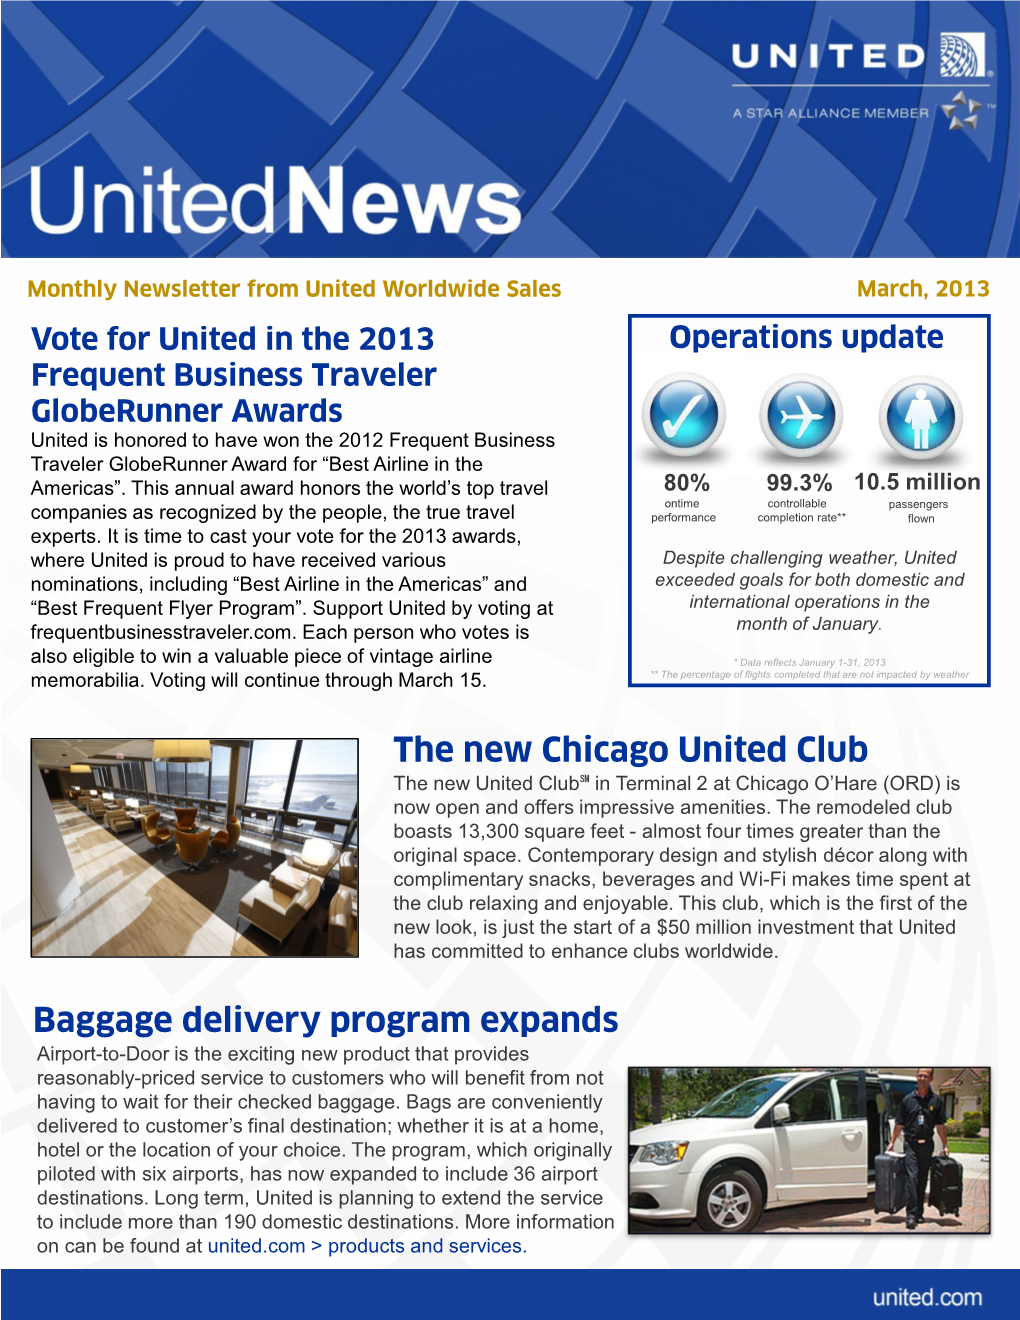 The New Chicago United Club Baggage Delivery Program Expands